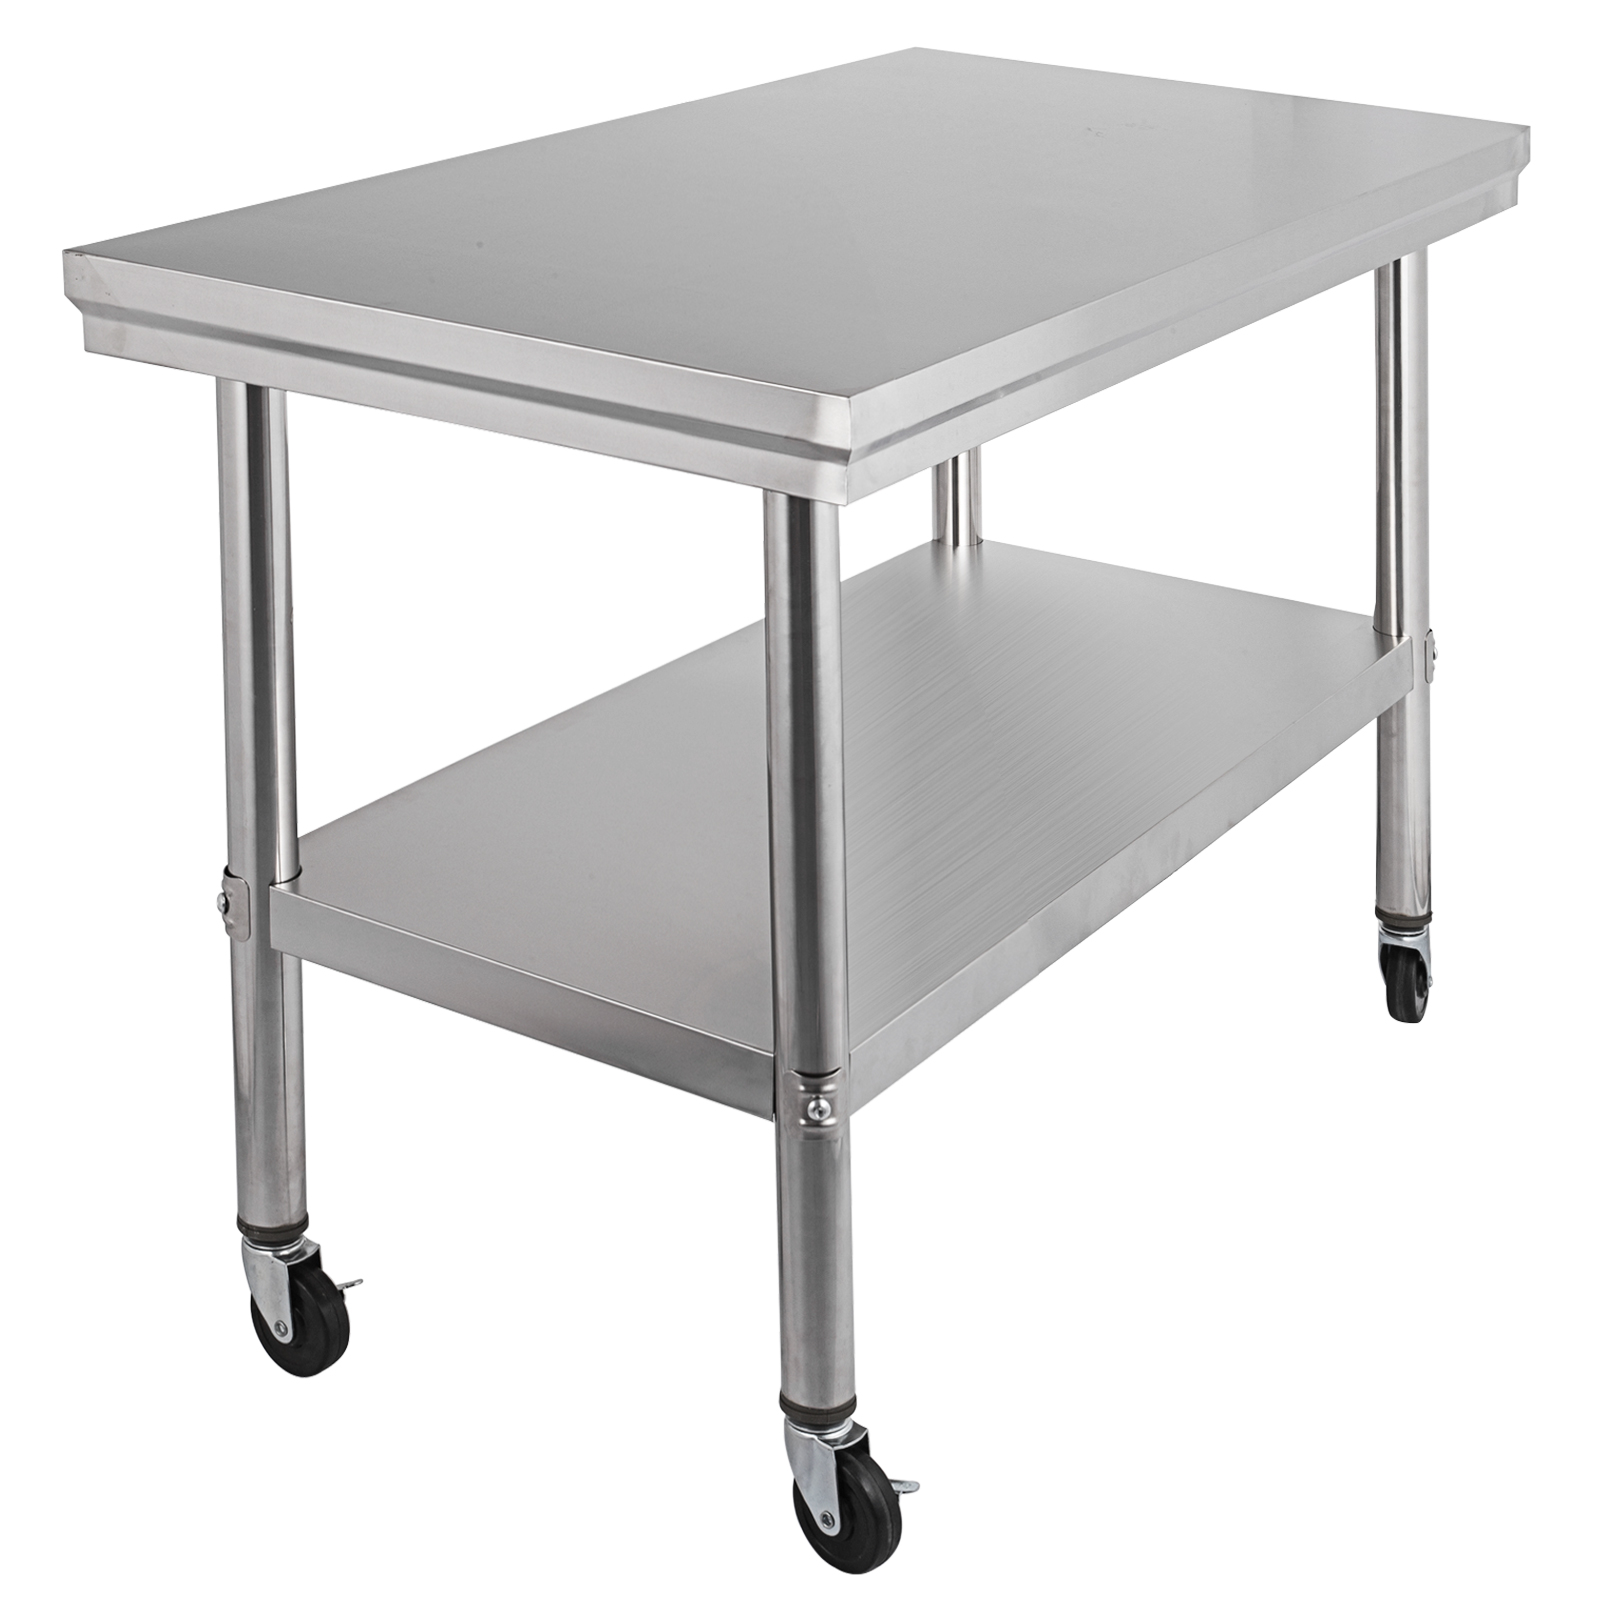 Commercial 30" x 24" Stainless Steel Work Prep Table With 4 Wheels Stainless Steel Work Table With Wheels